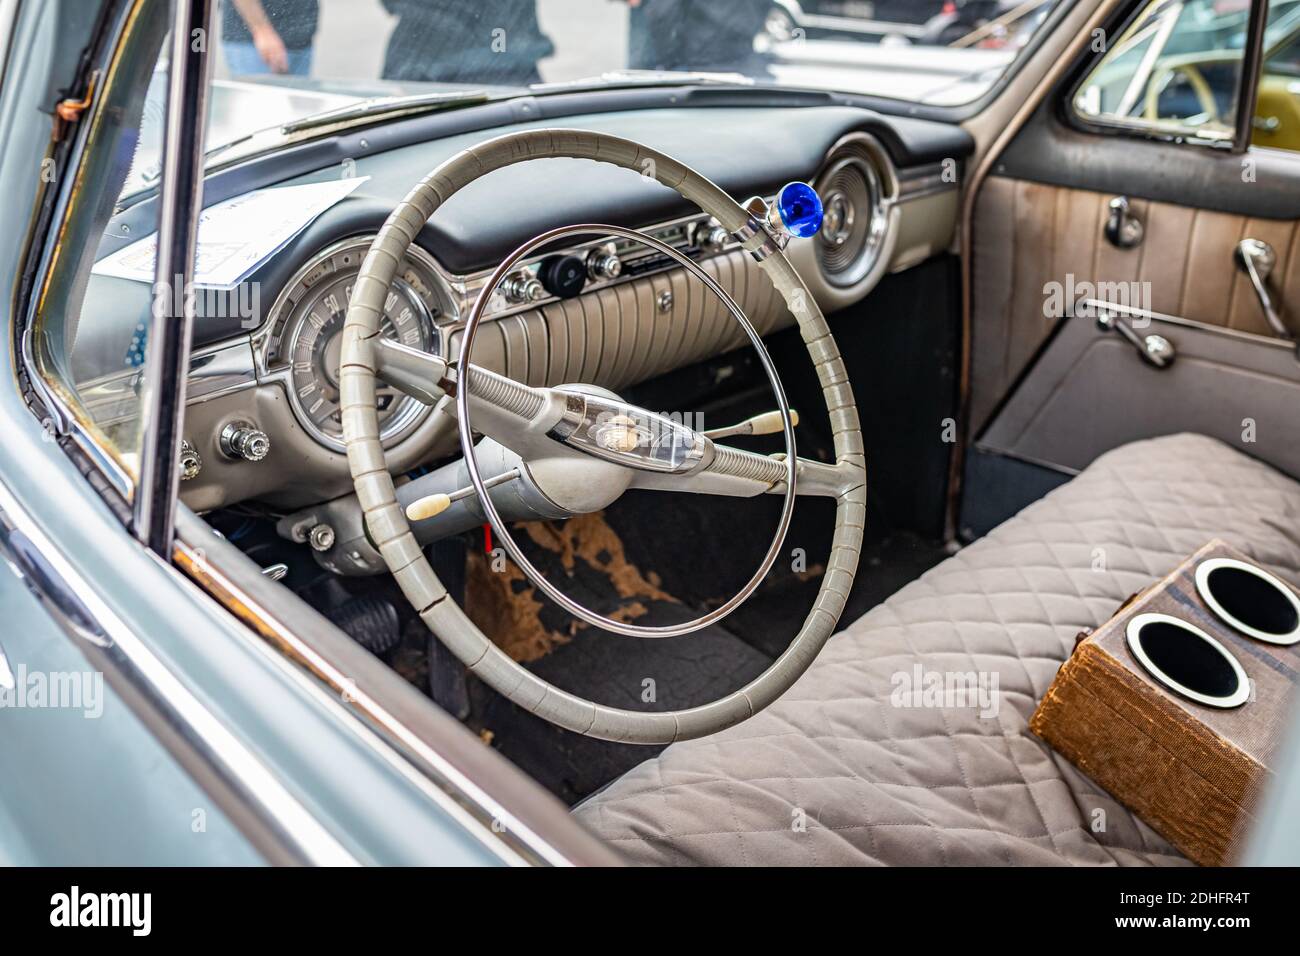 Tybee Island, GA - October 3, 2020: The 1953 Oldsmobile Super 88 sedan's unique steering wheel at a local car show. Stock Photo